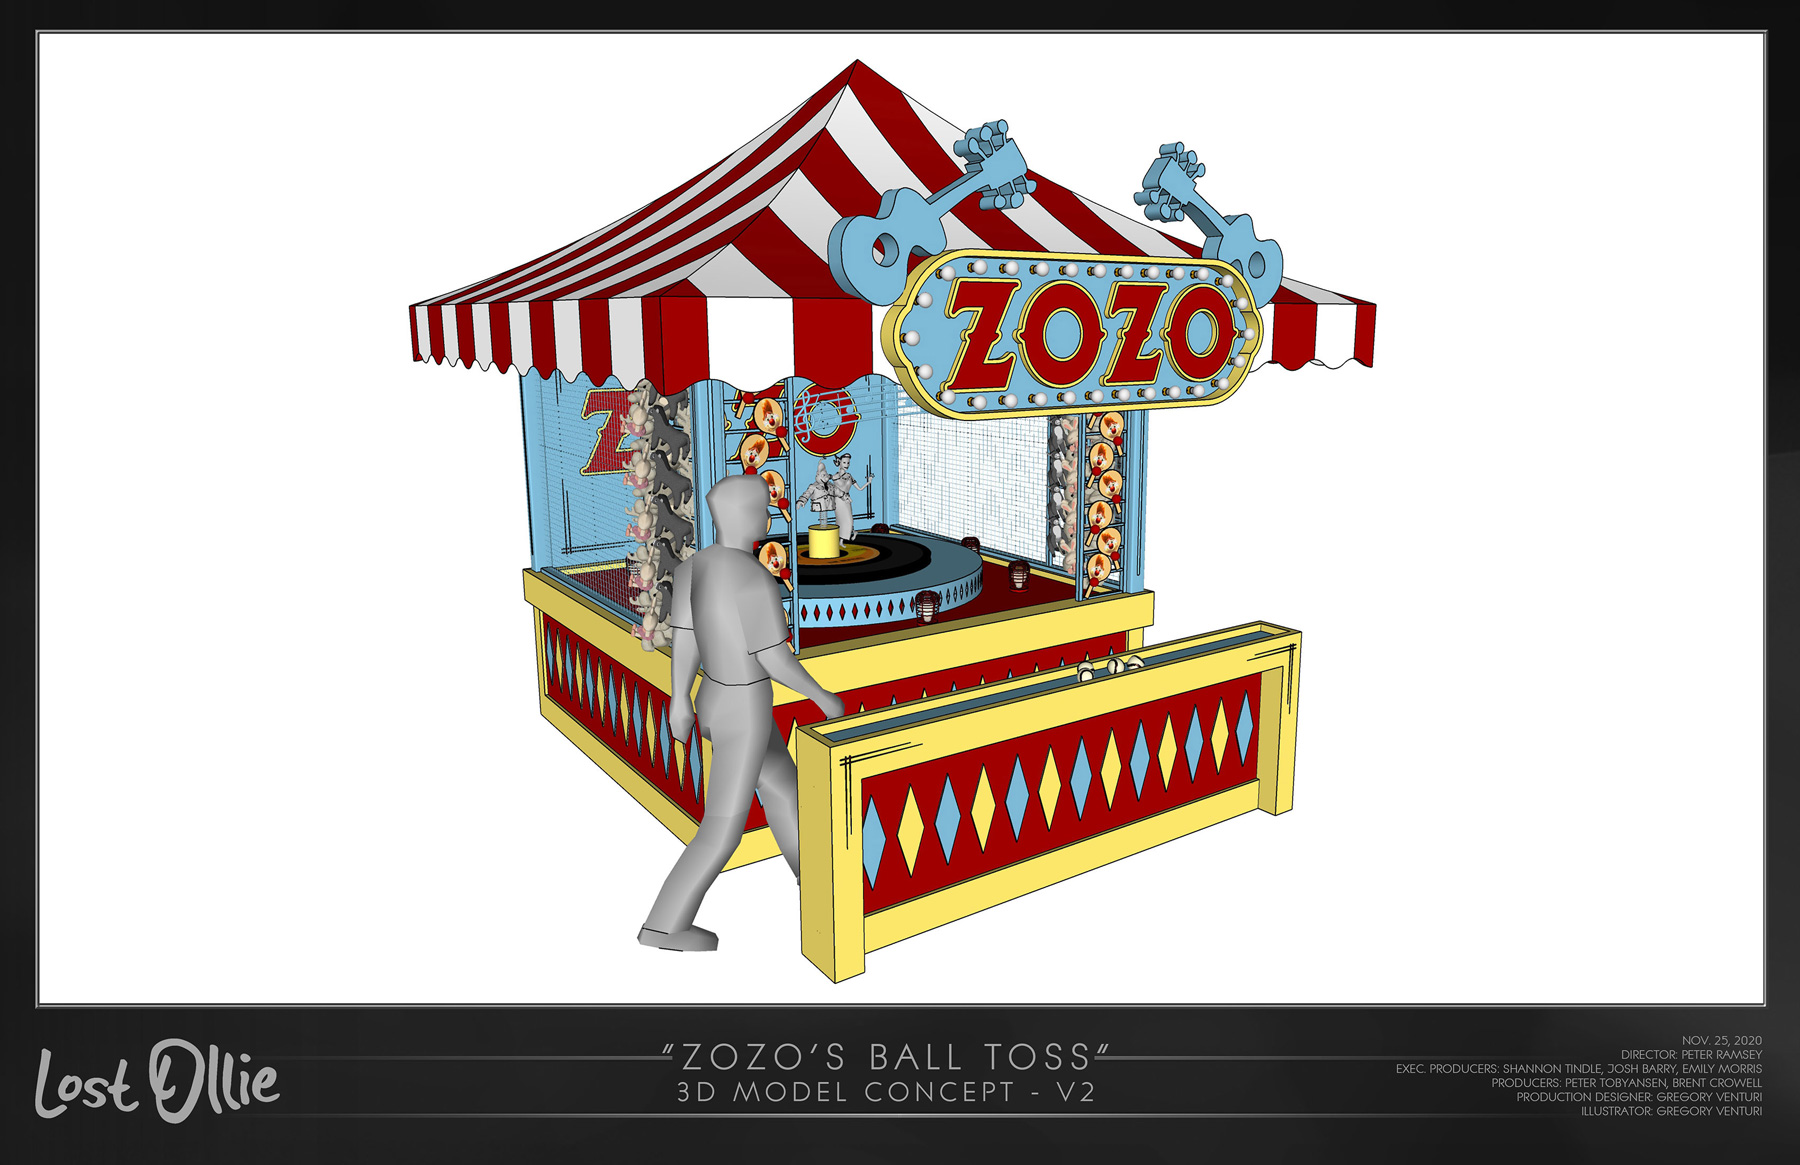 24 Lost Ollie 'Dreamland Amusement Park' Zozo's Ball Toss Booth Location Install 3D Model View